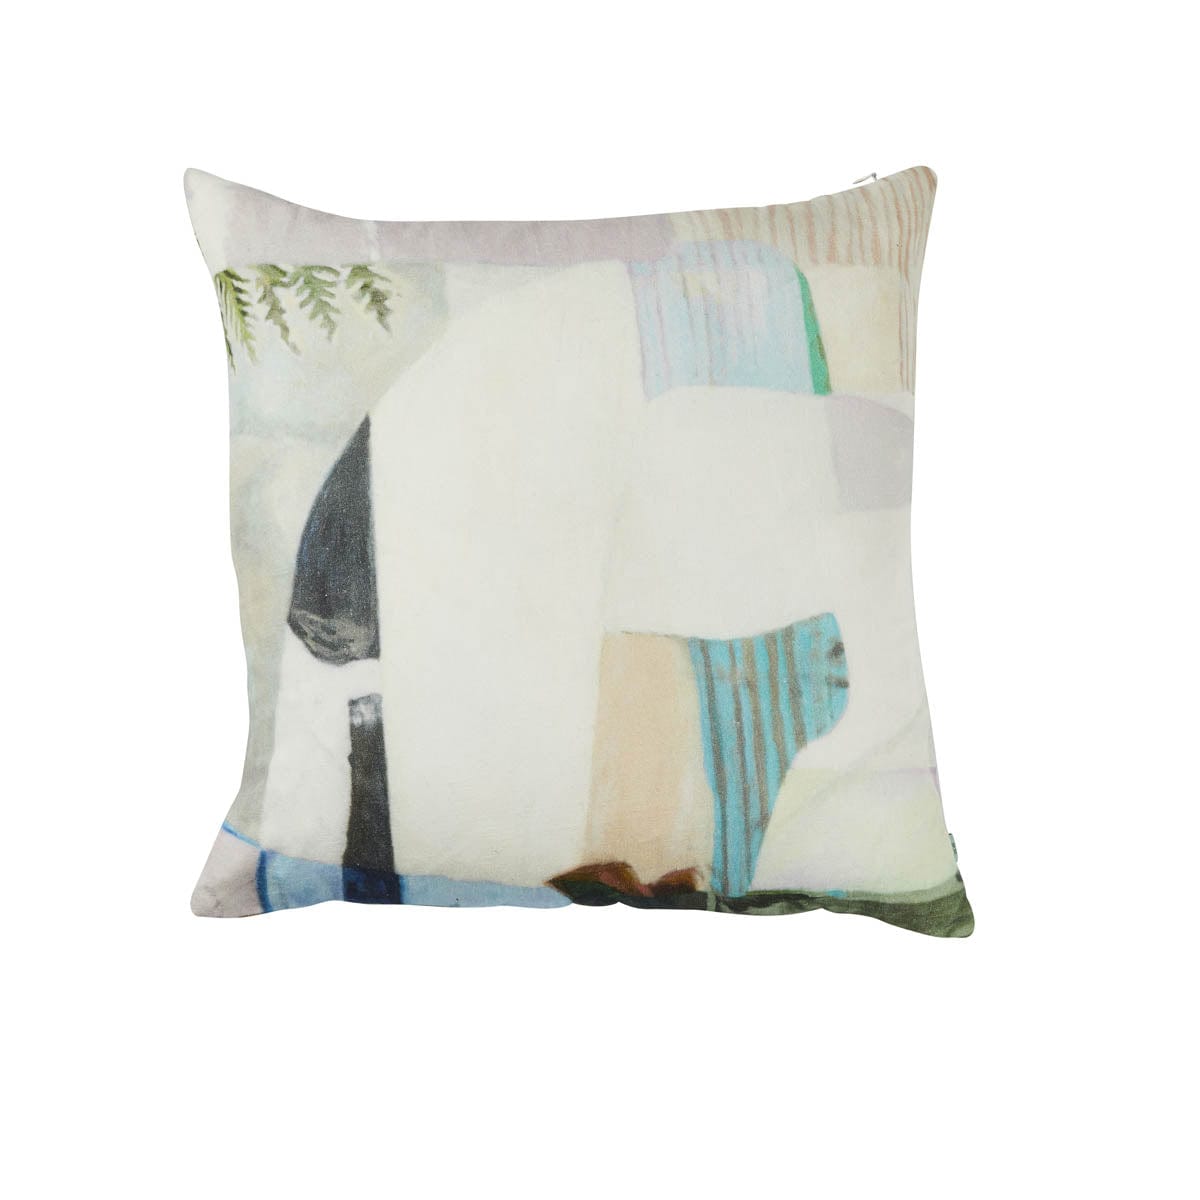 Art Cushion - Love it when a plan comes together